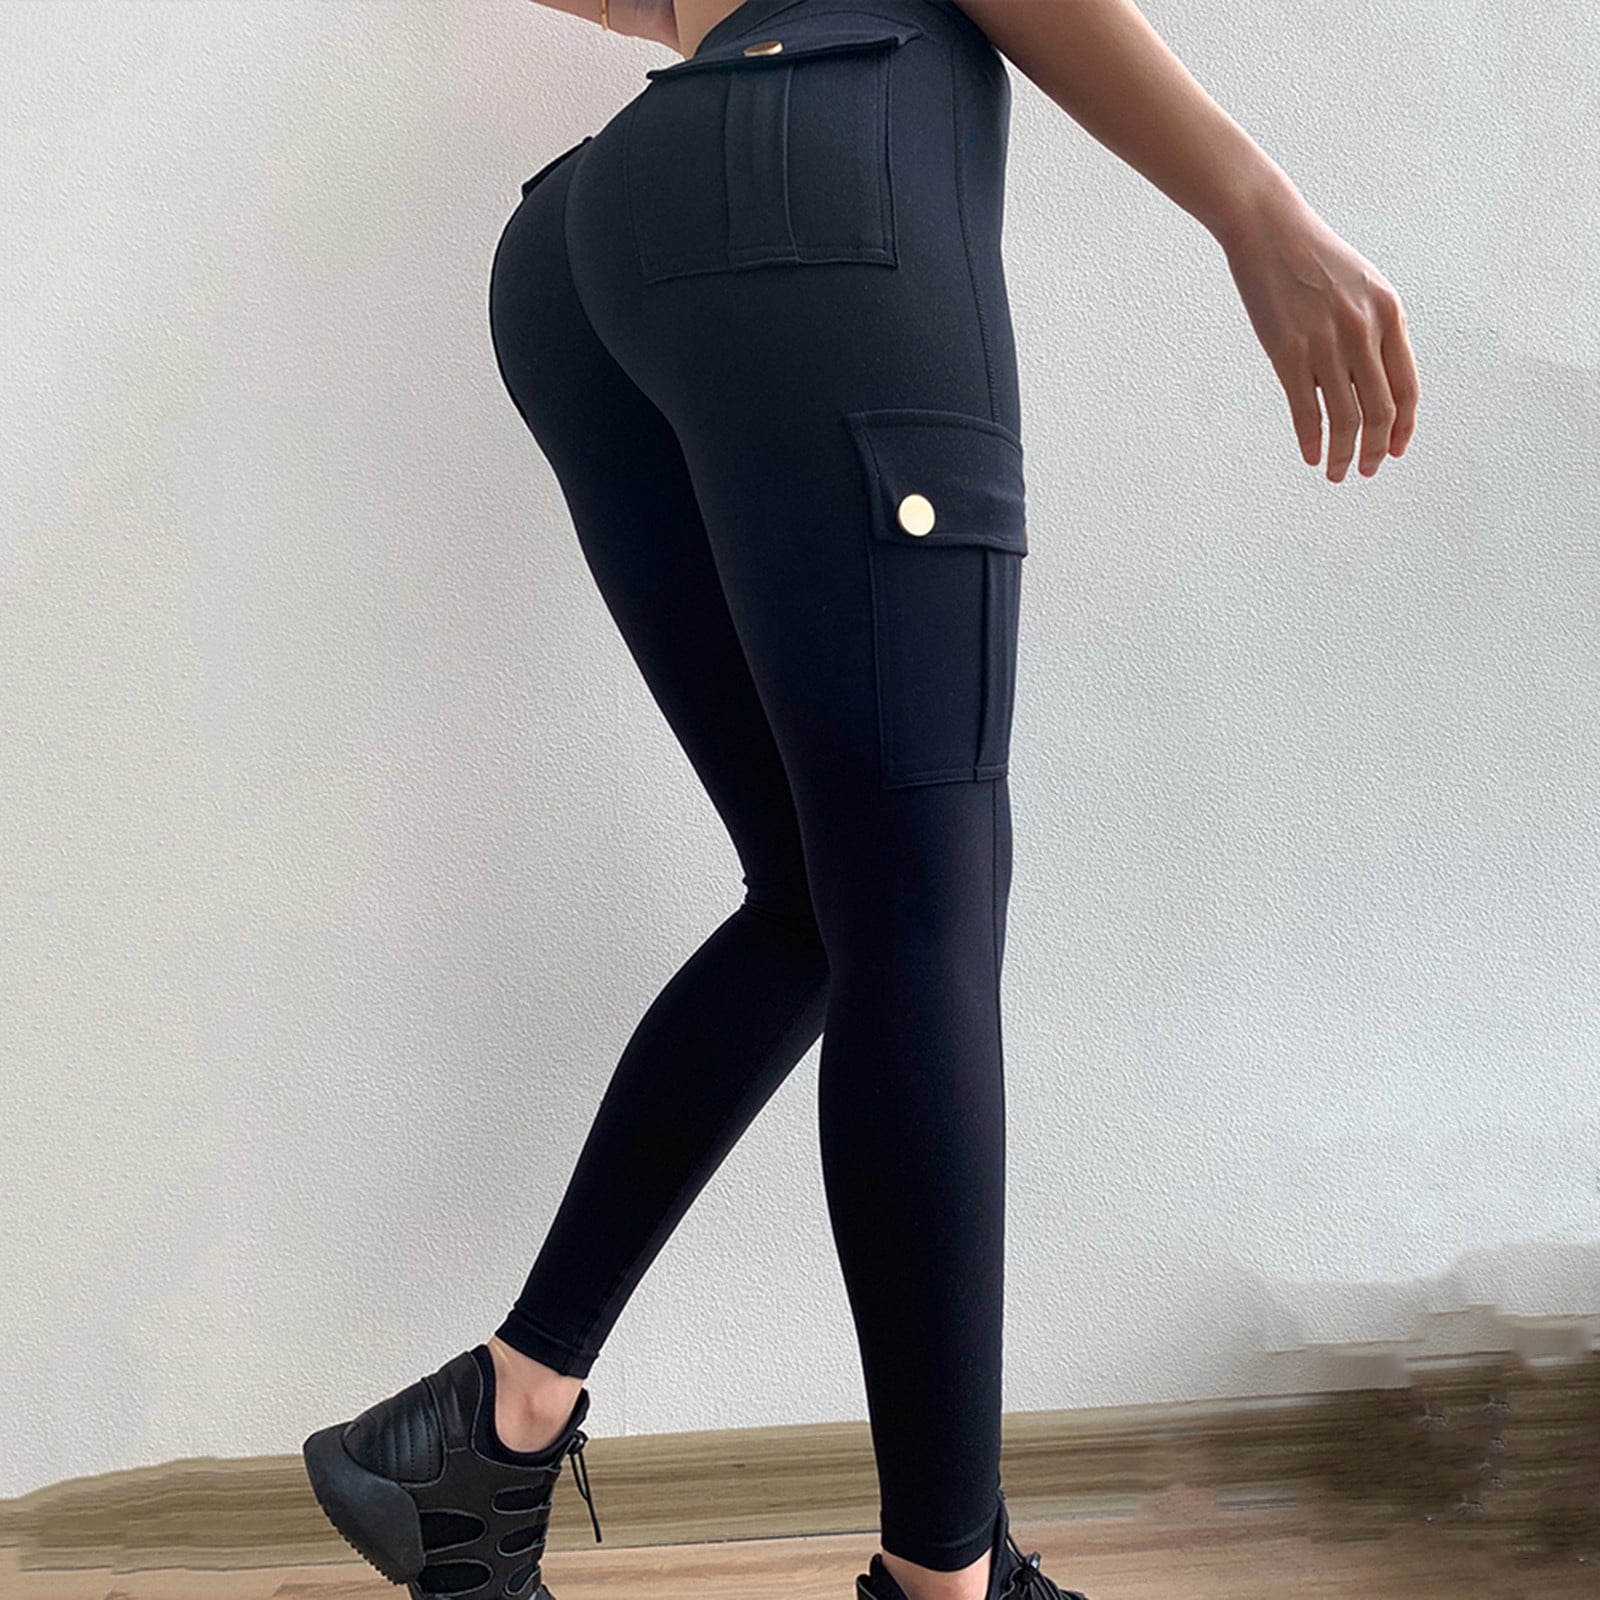 frehsky yoga pants ladies high waist fitness pants sports stretch yoga  pants with pockets yoga pants with pockets for women black